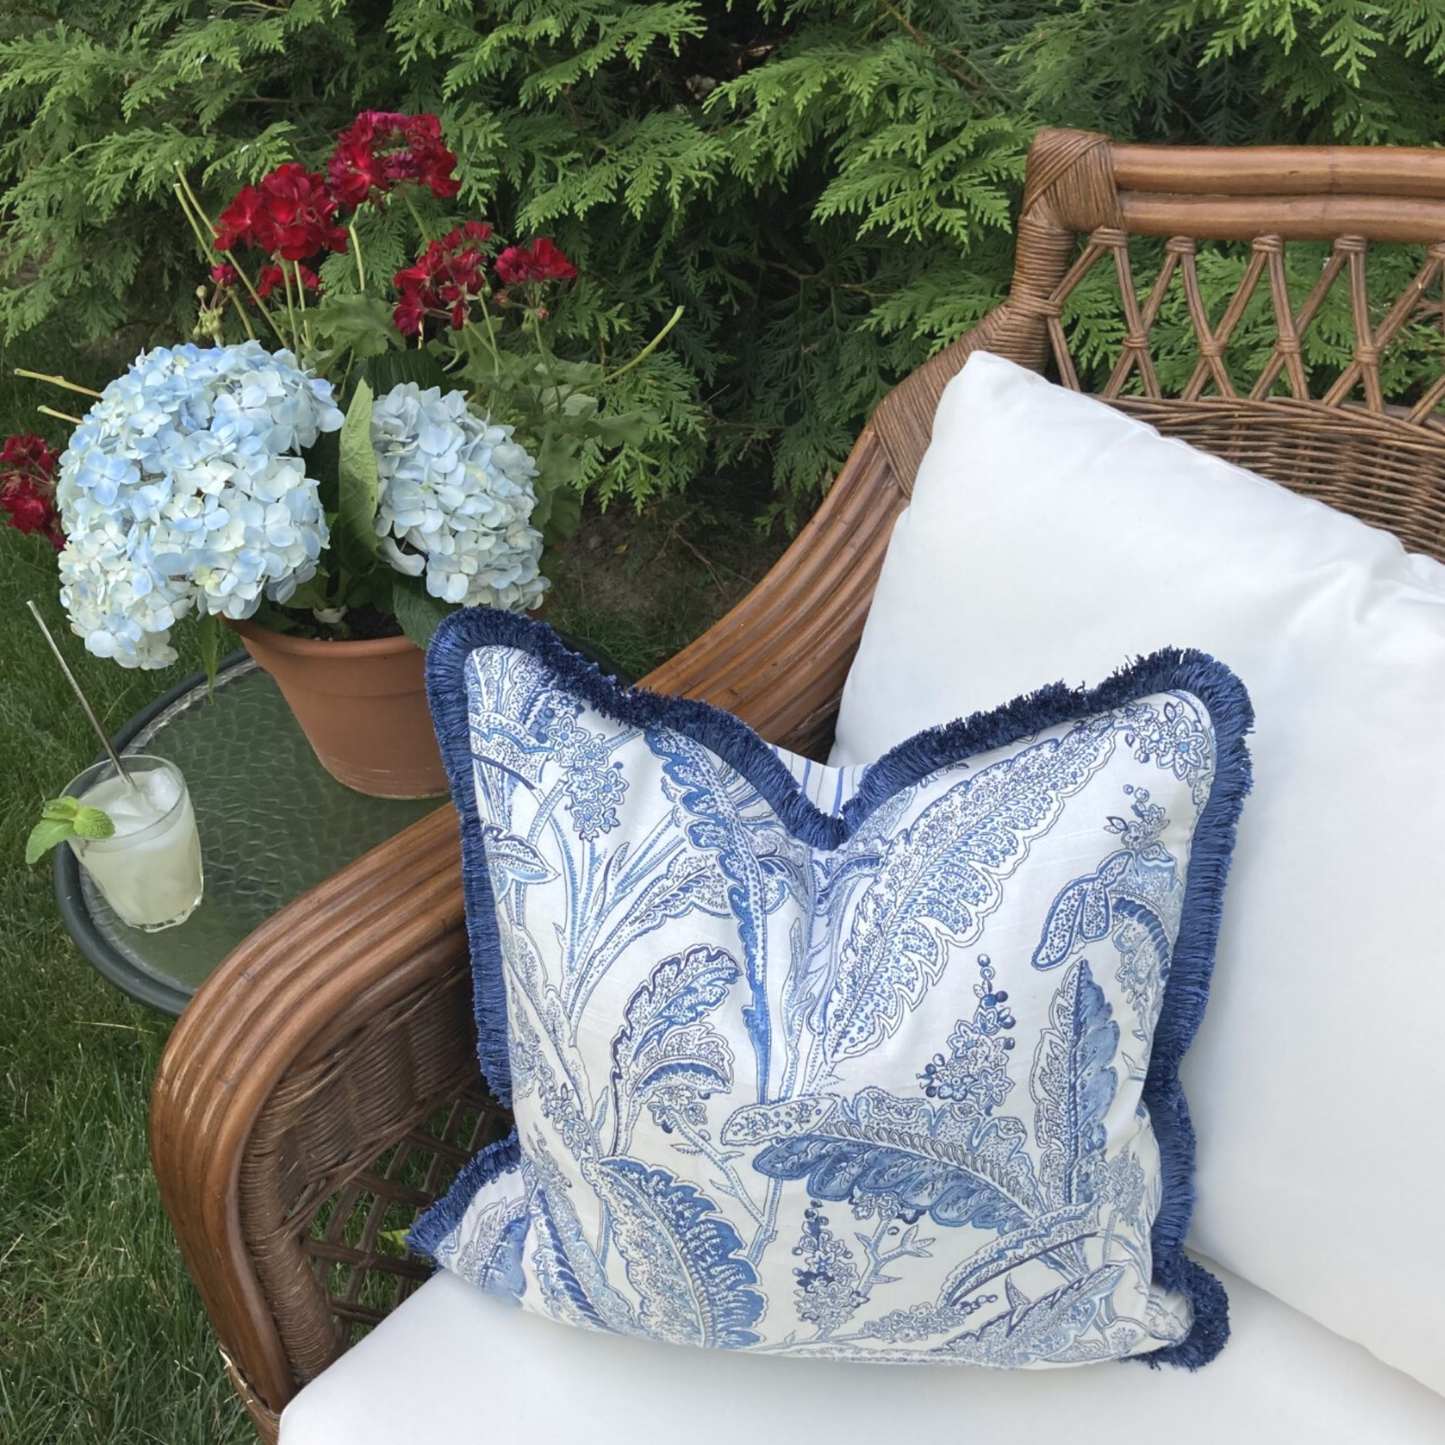 Sanibel Ferns Indigo Blue 20 X 20 Square Decorative Pillow with Down Feather Insert